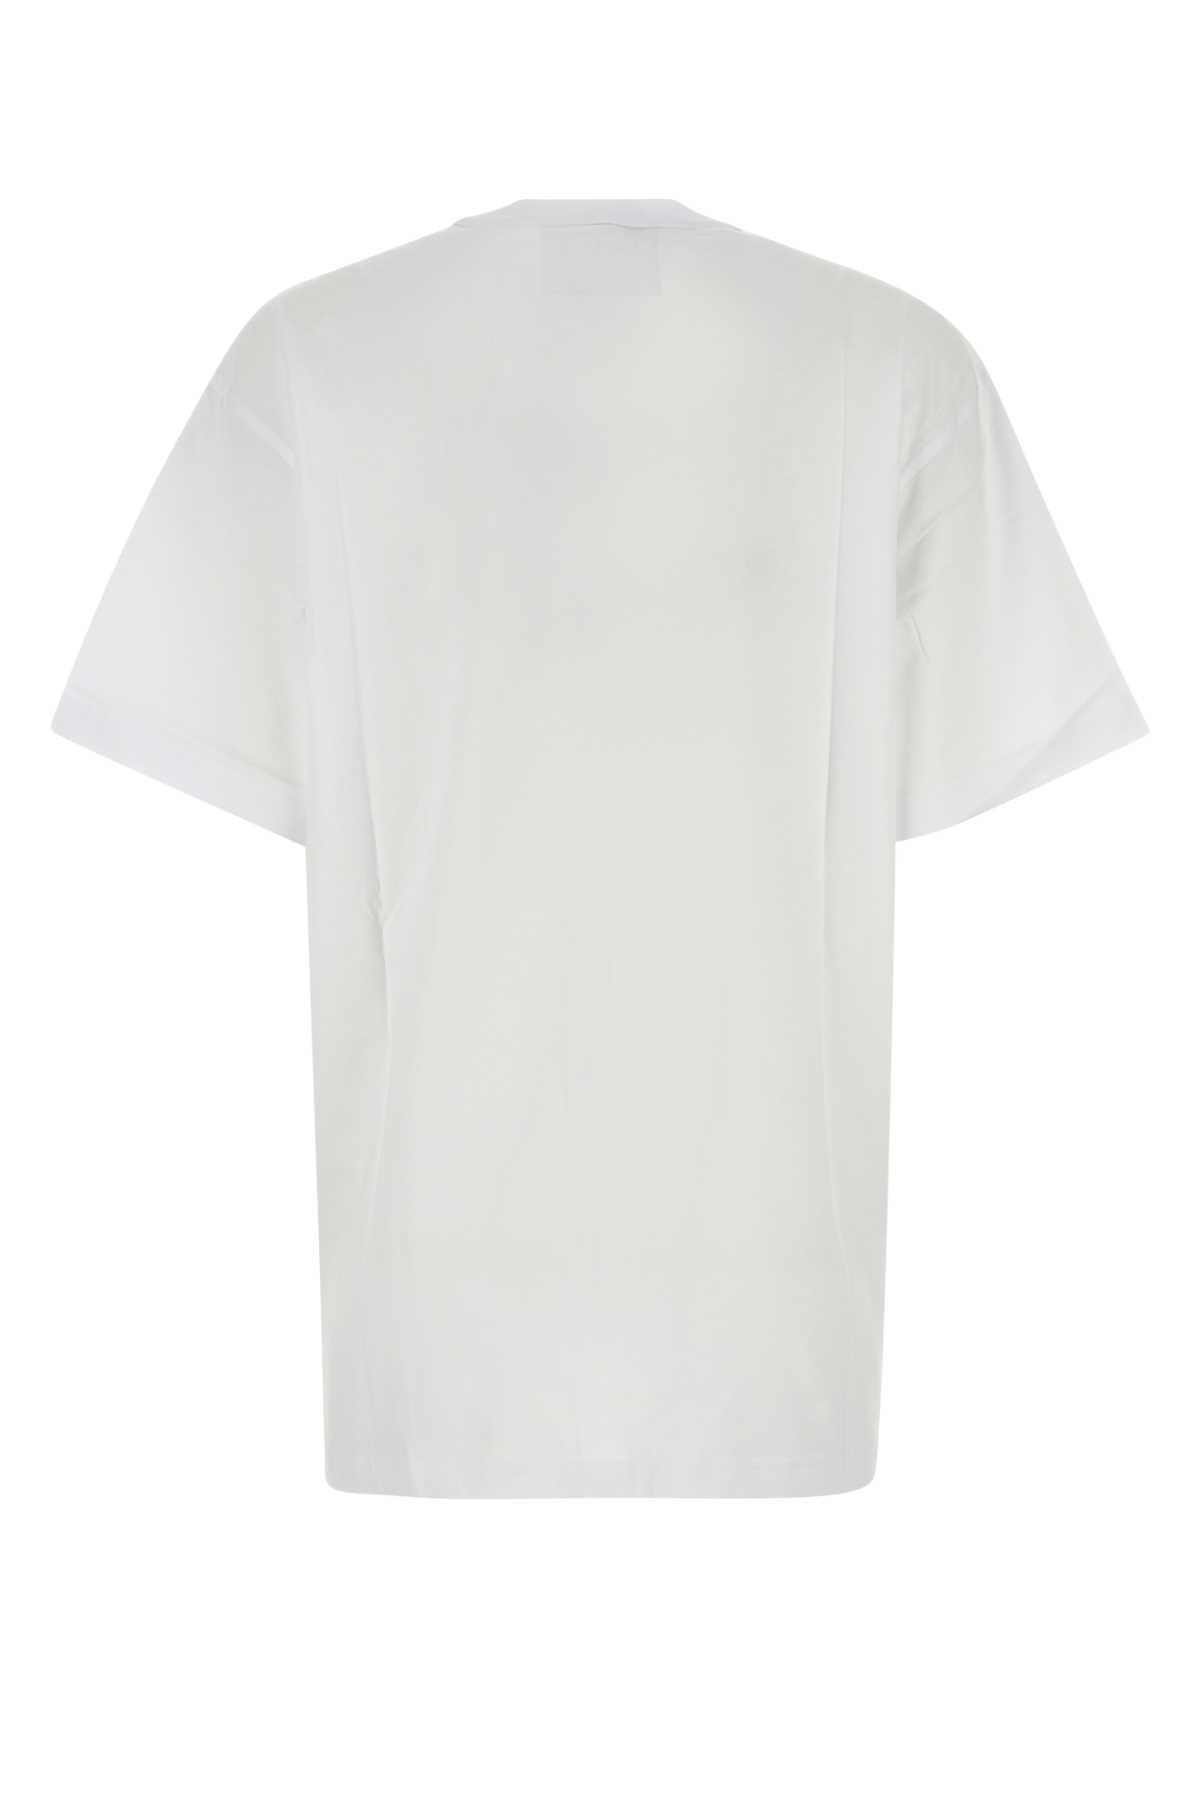 Versace Jeans Couture White Cotton T-shirt In G03